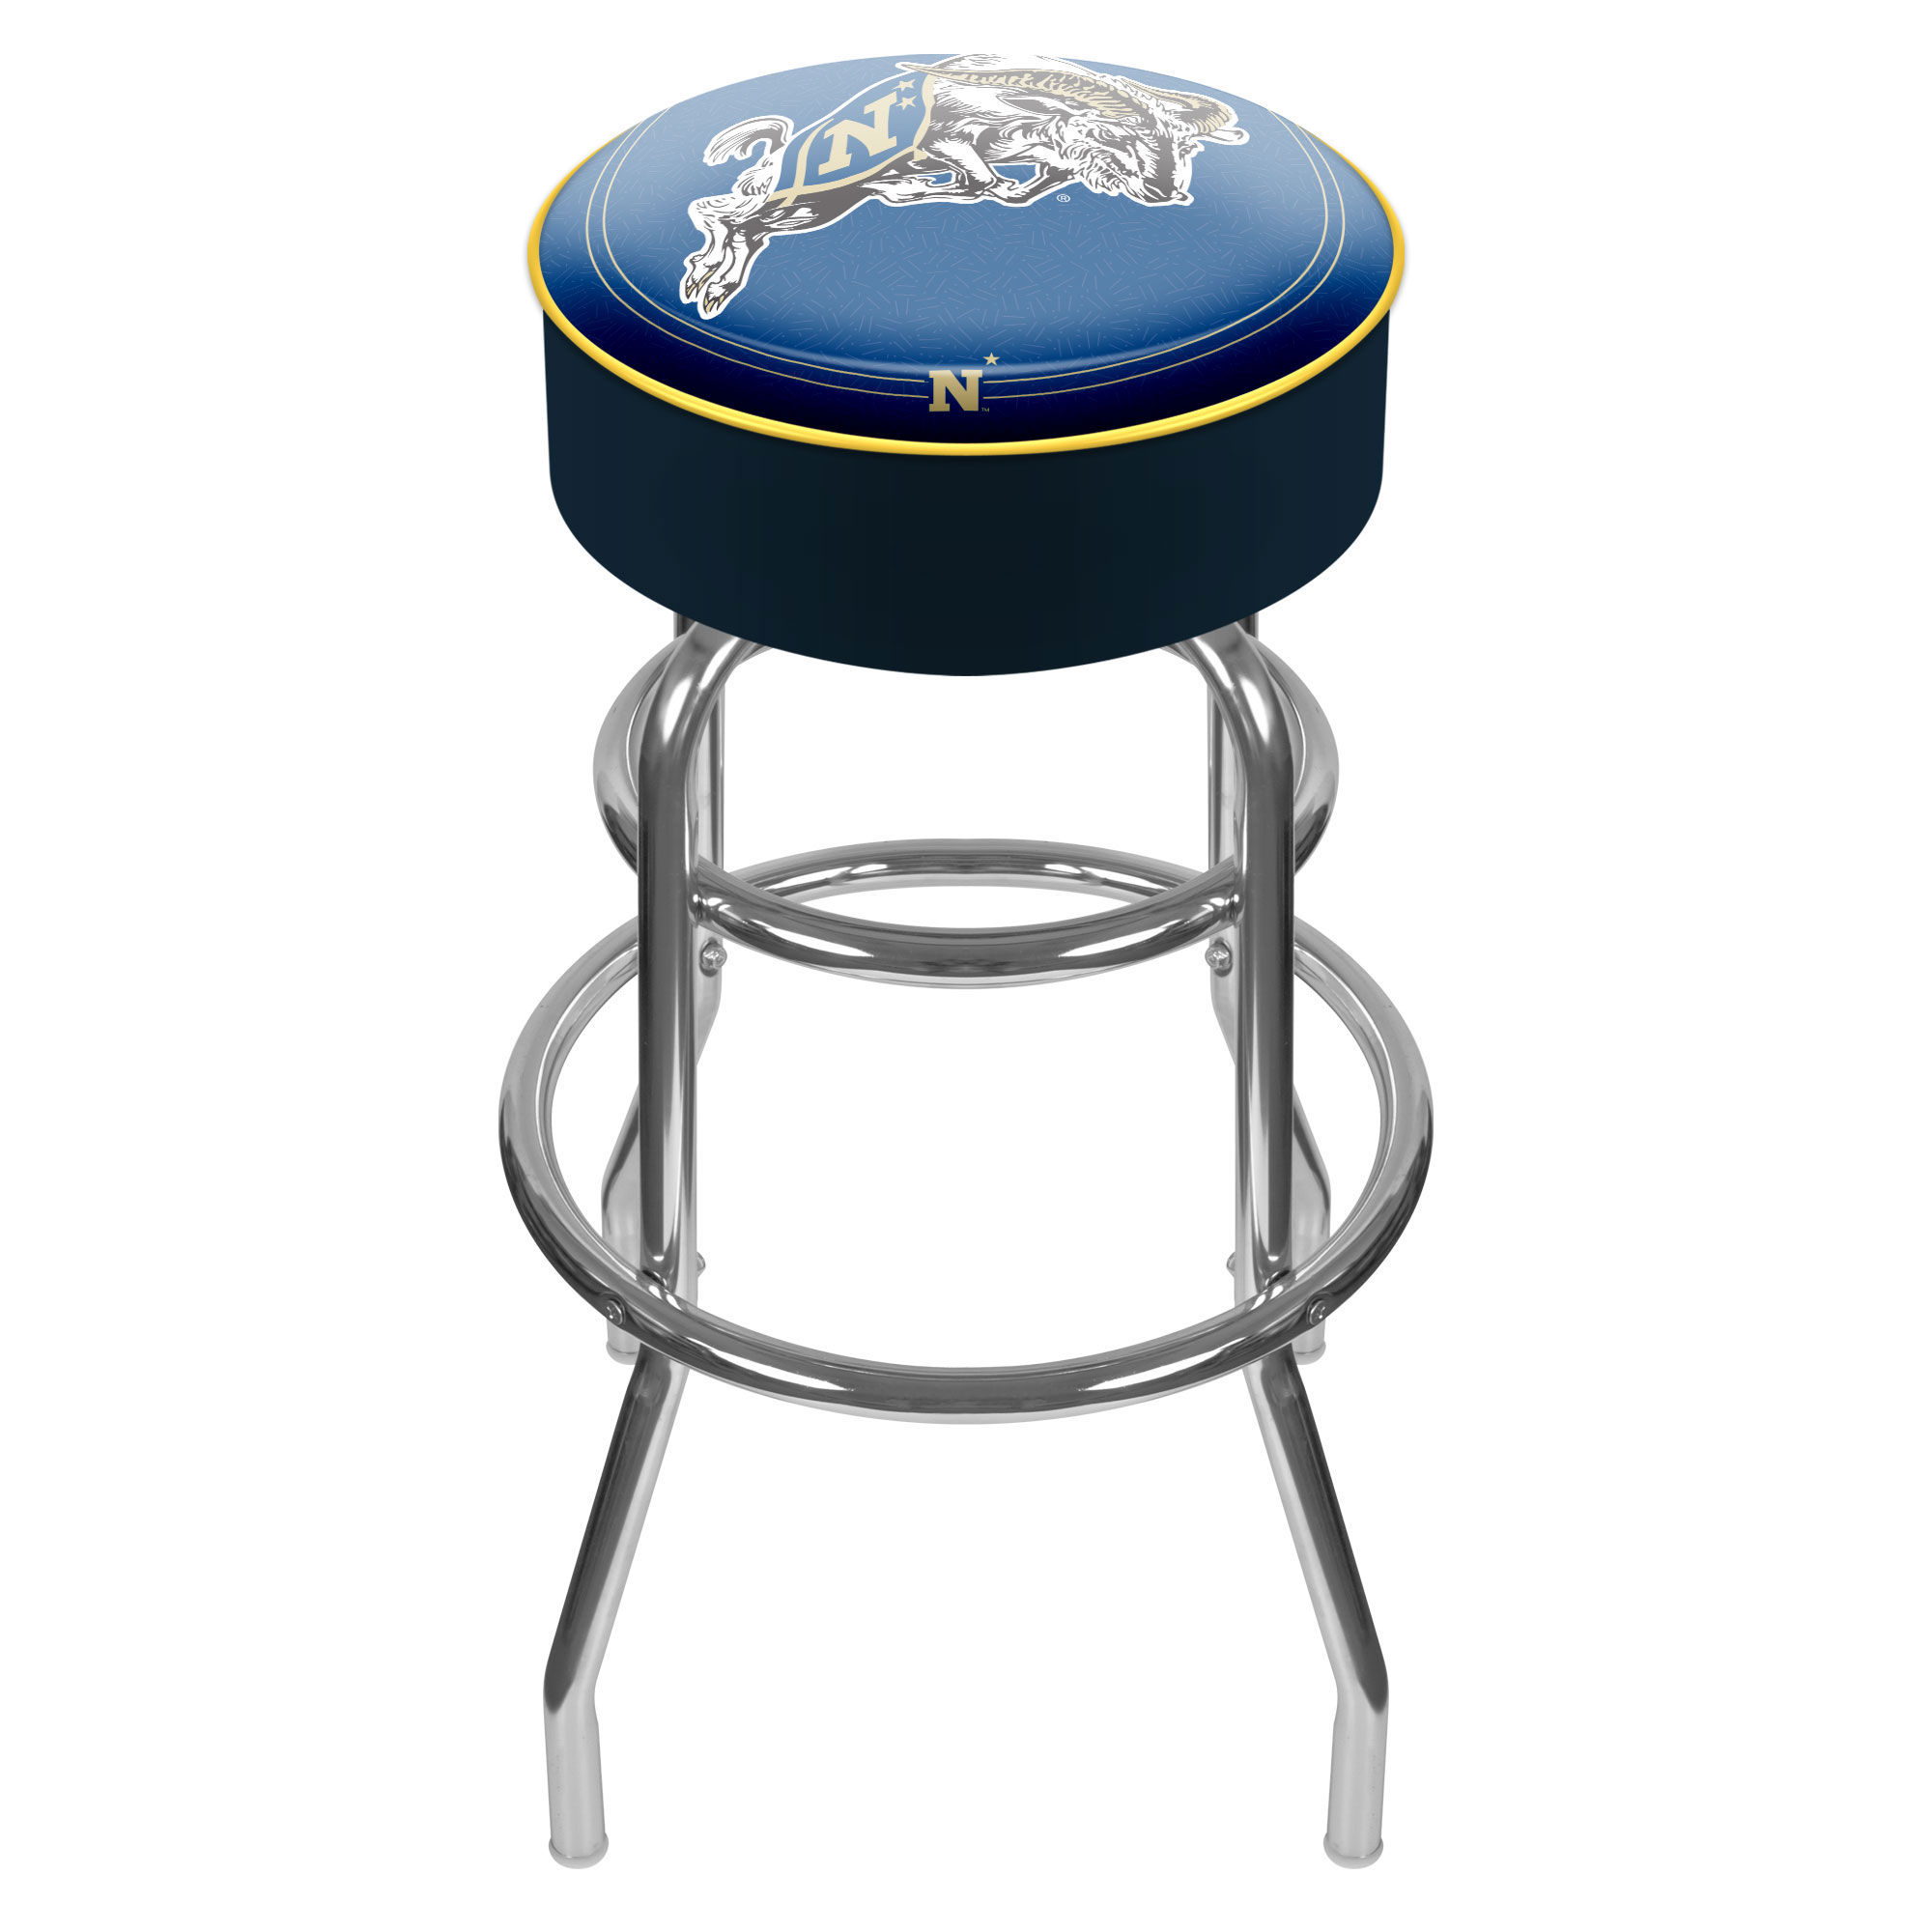 Trademark United States Naval Academy Padded Bar Stool - Made In USA